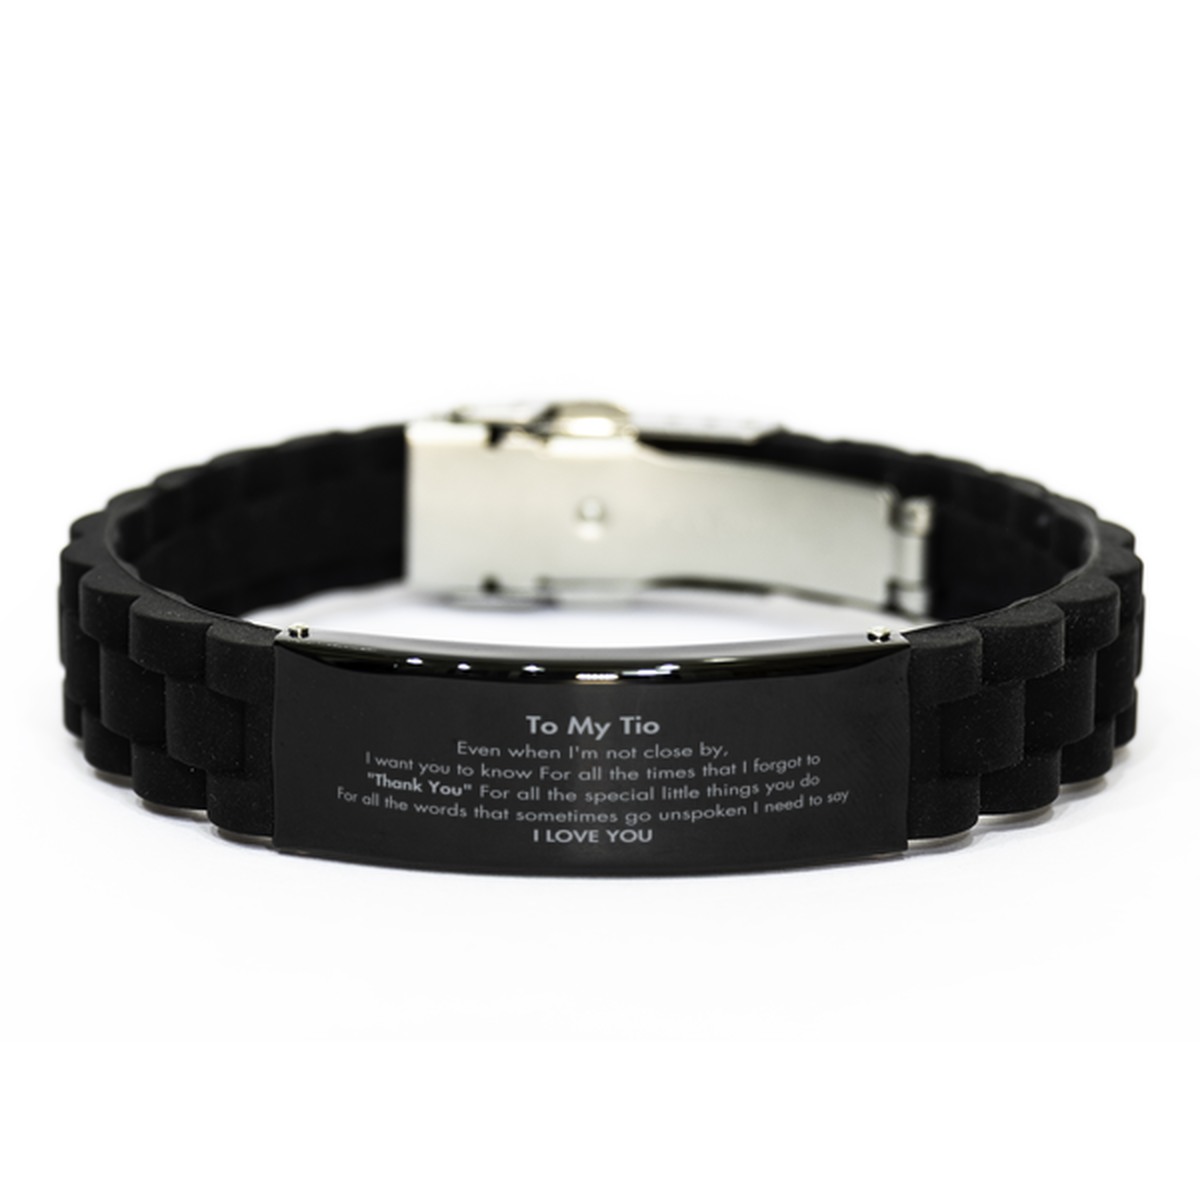 Thank You Gifts for Tio, Keepsake Black Glidelock Clasp Bracelet Gifts for Tio Birthday Mother's day Father's Day Tio For all the words That sometimes go unspoken I need to say I LOVE YOU